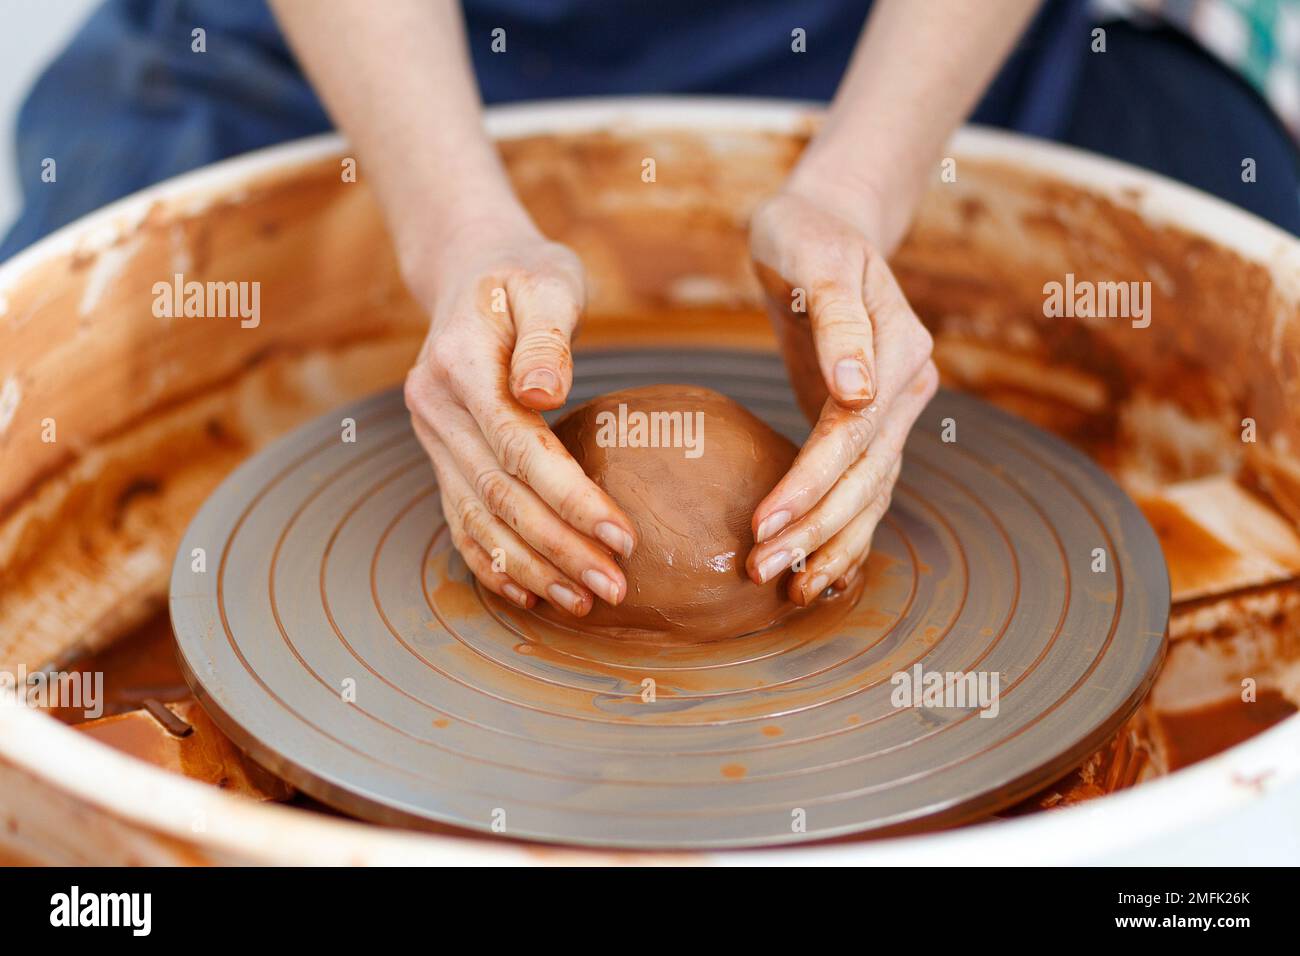 Cropped Image of Unrecognizable Female Ceramics Maker working with clay on Pottery Wheel in Cozy Workshop, Creative People Handcraft Pottery Class. Stock Photo